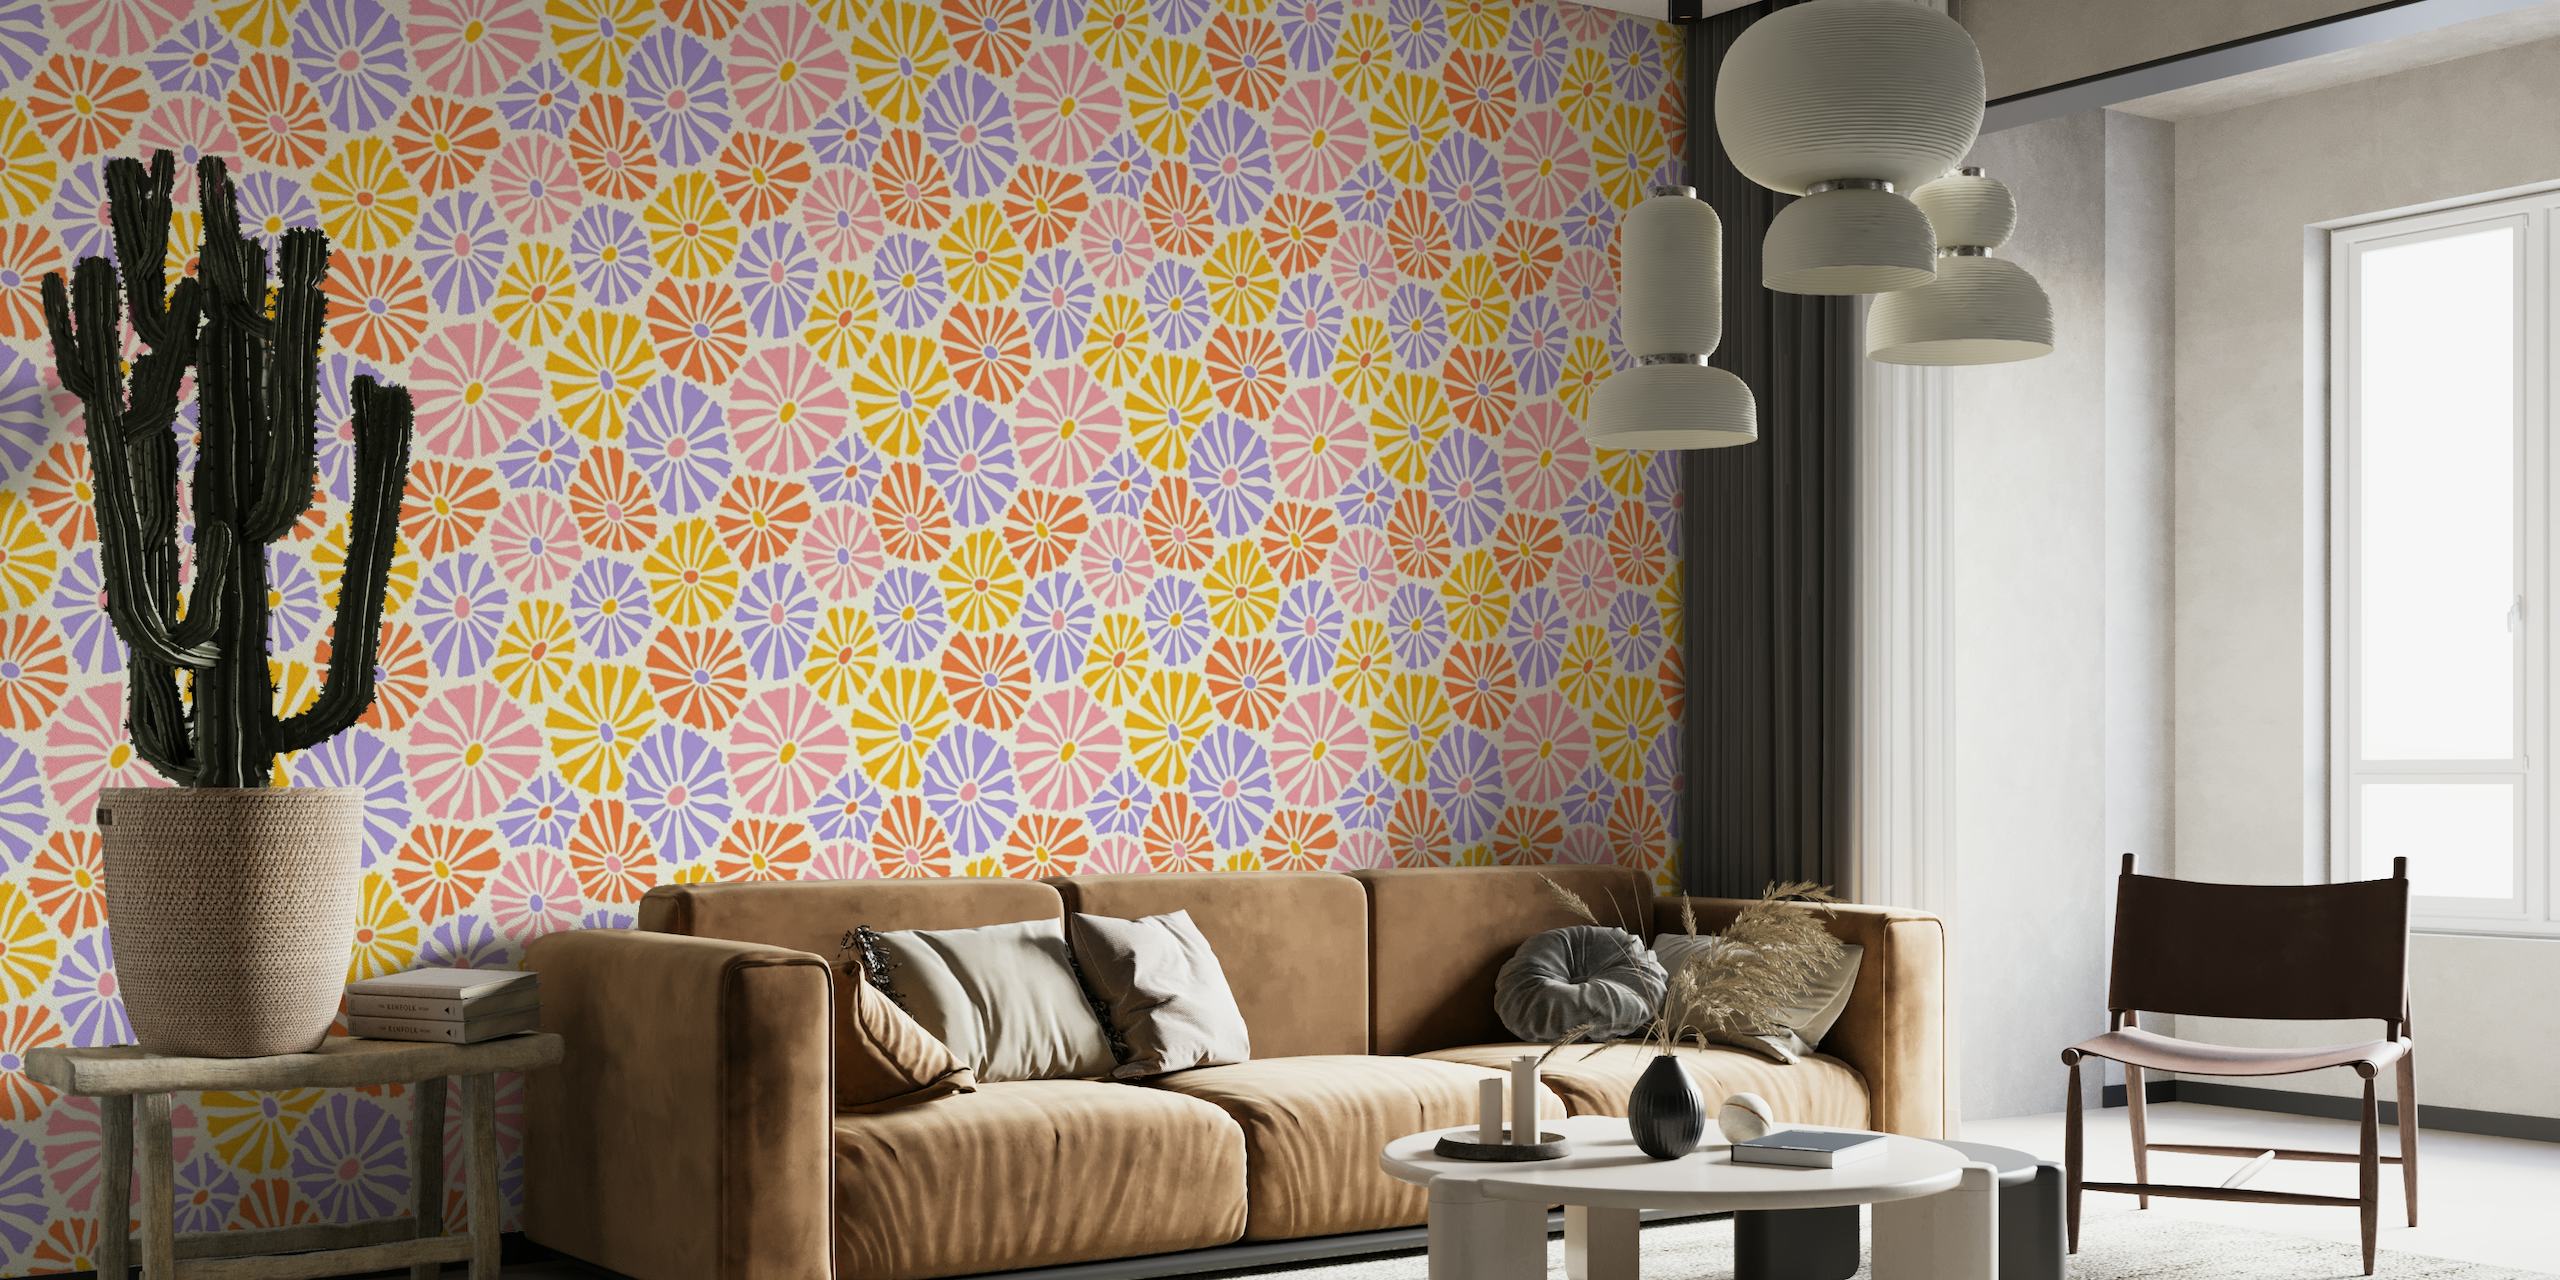 Retro-inspired wall mural depicting colorful daisies in pink, orange, yellow, and purple on a white background.